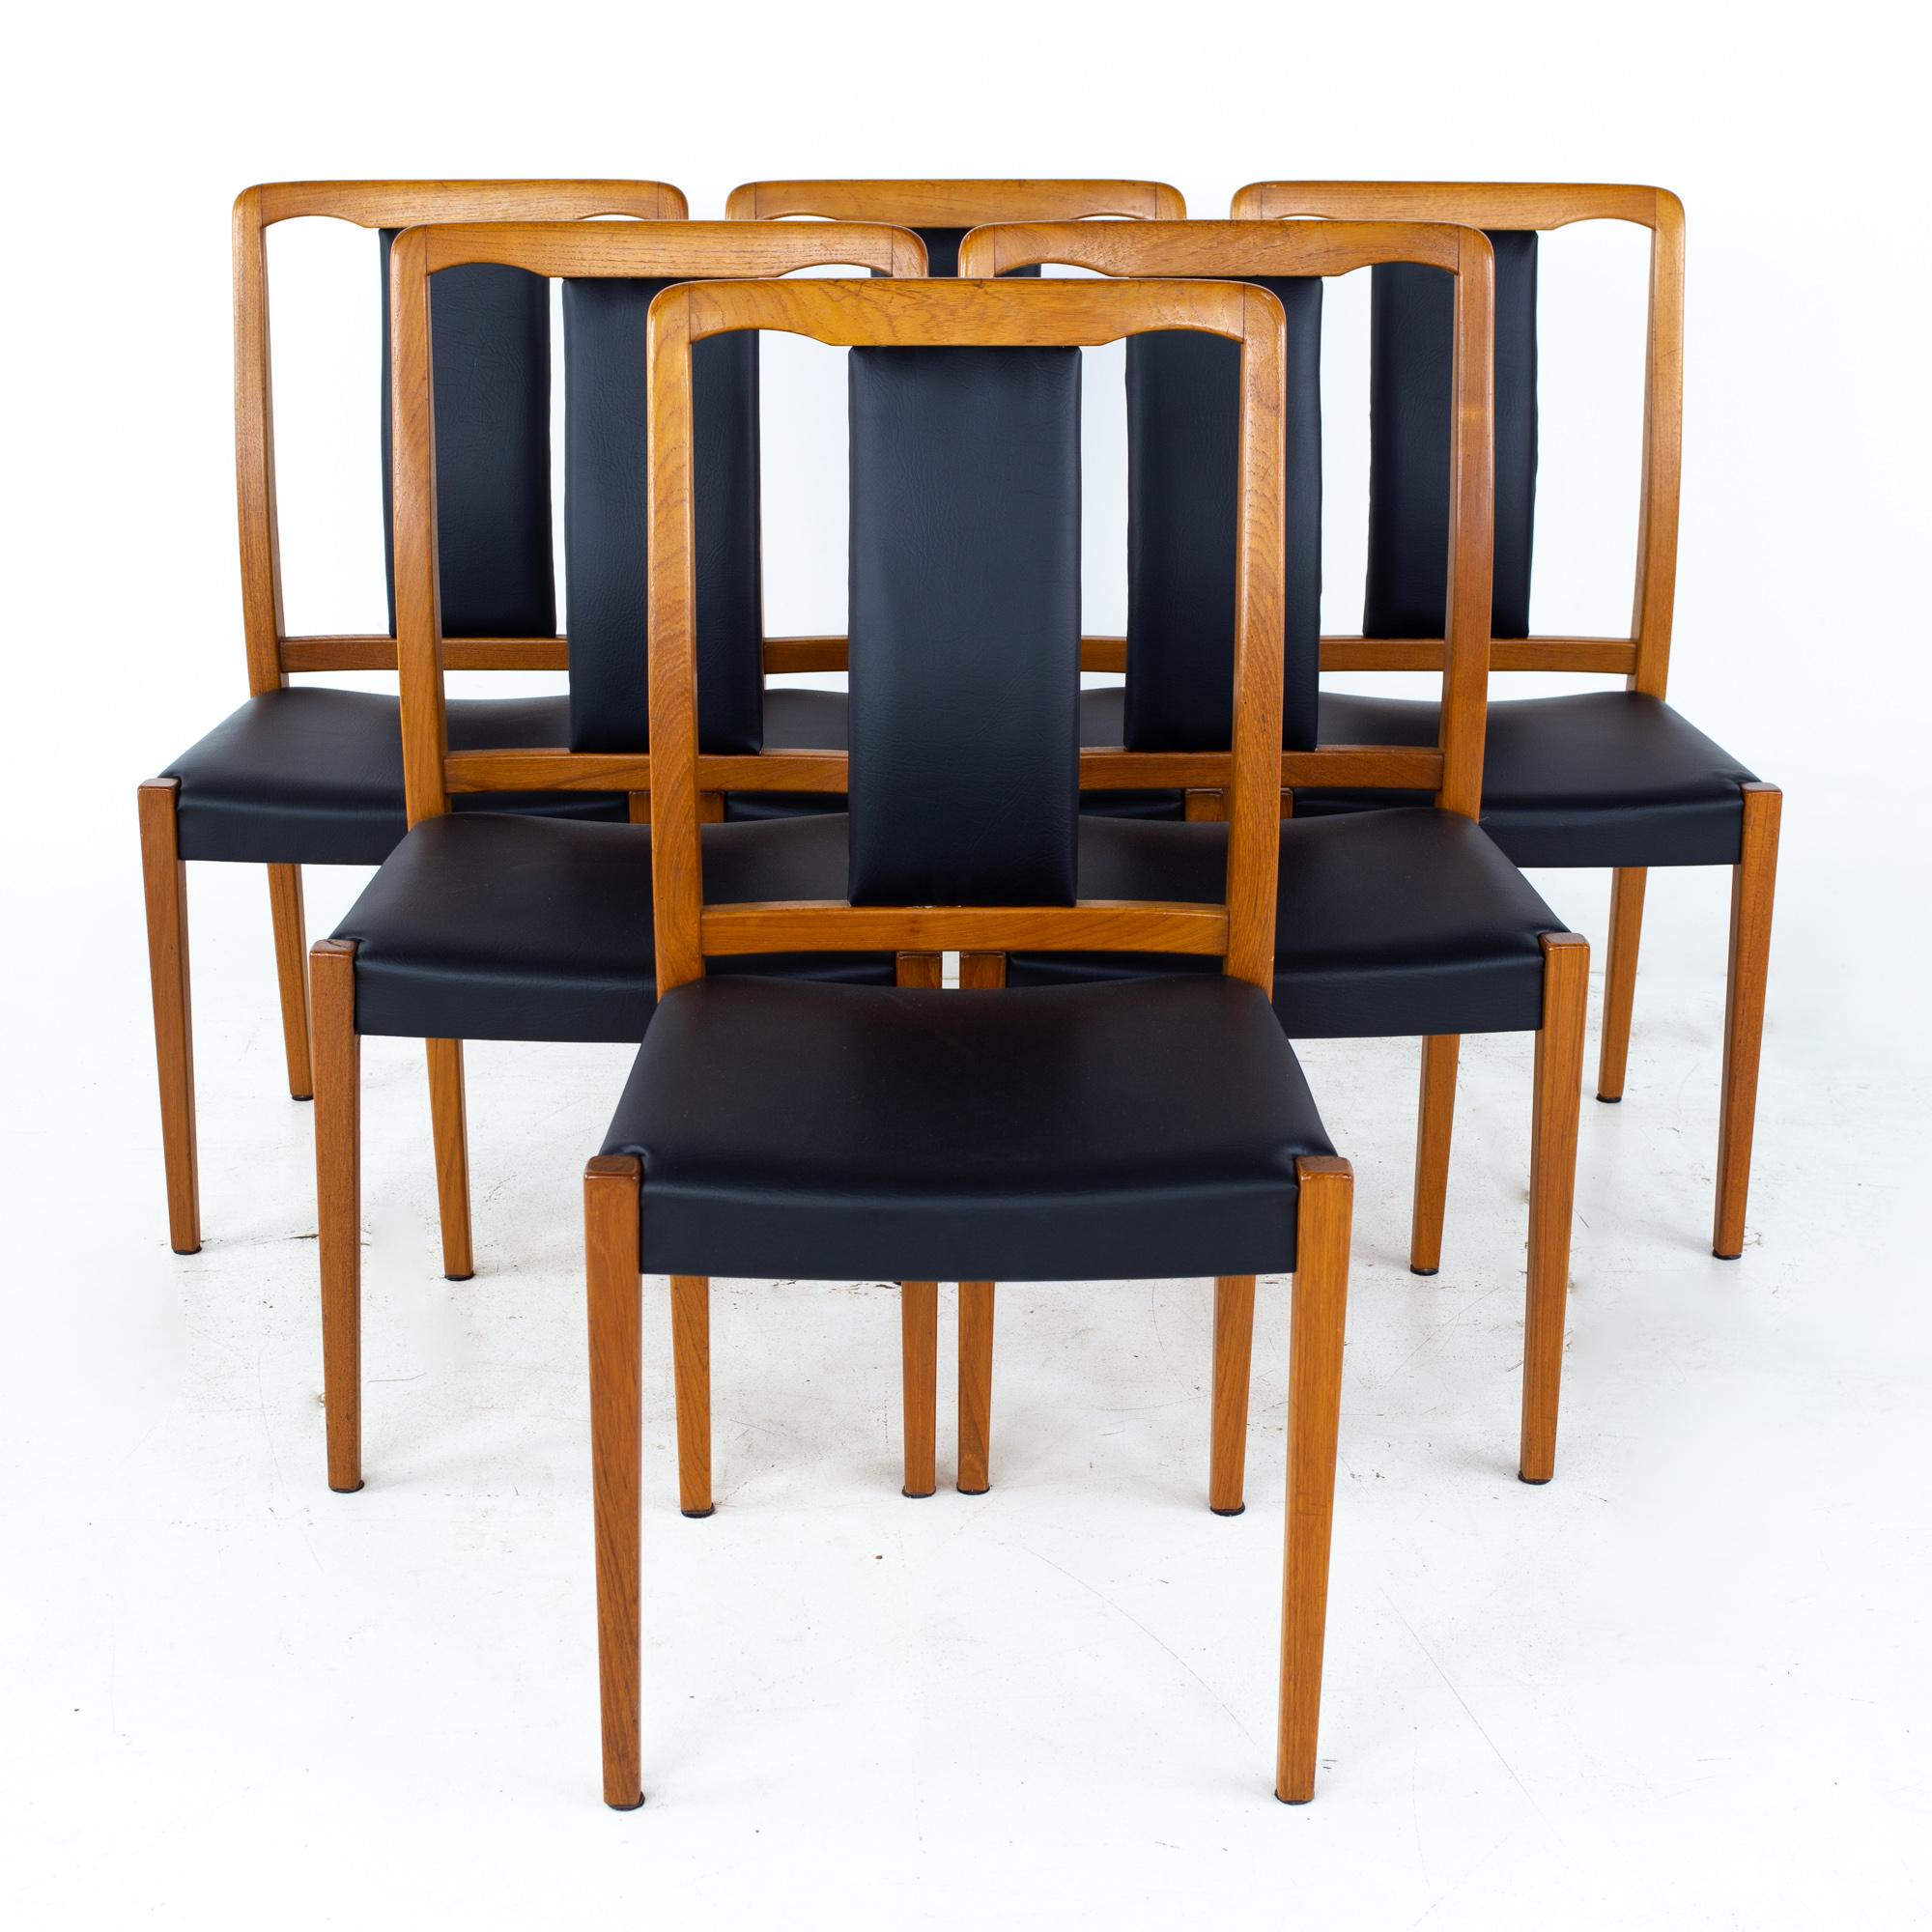 Nils Jonsson for Hugo Troeds mid century Danish teak dining chairs - Set of 6
Each chair measures: 18.5 wide x 16 deep x 37 high, with a seat height of 18 inches 

All pieces of furniture can be had in what we call restored vintage condition.